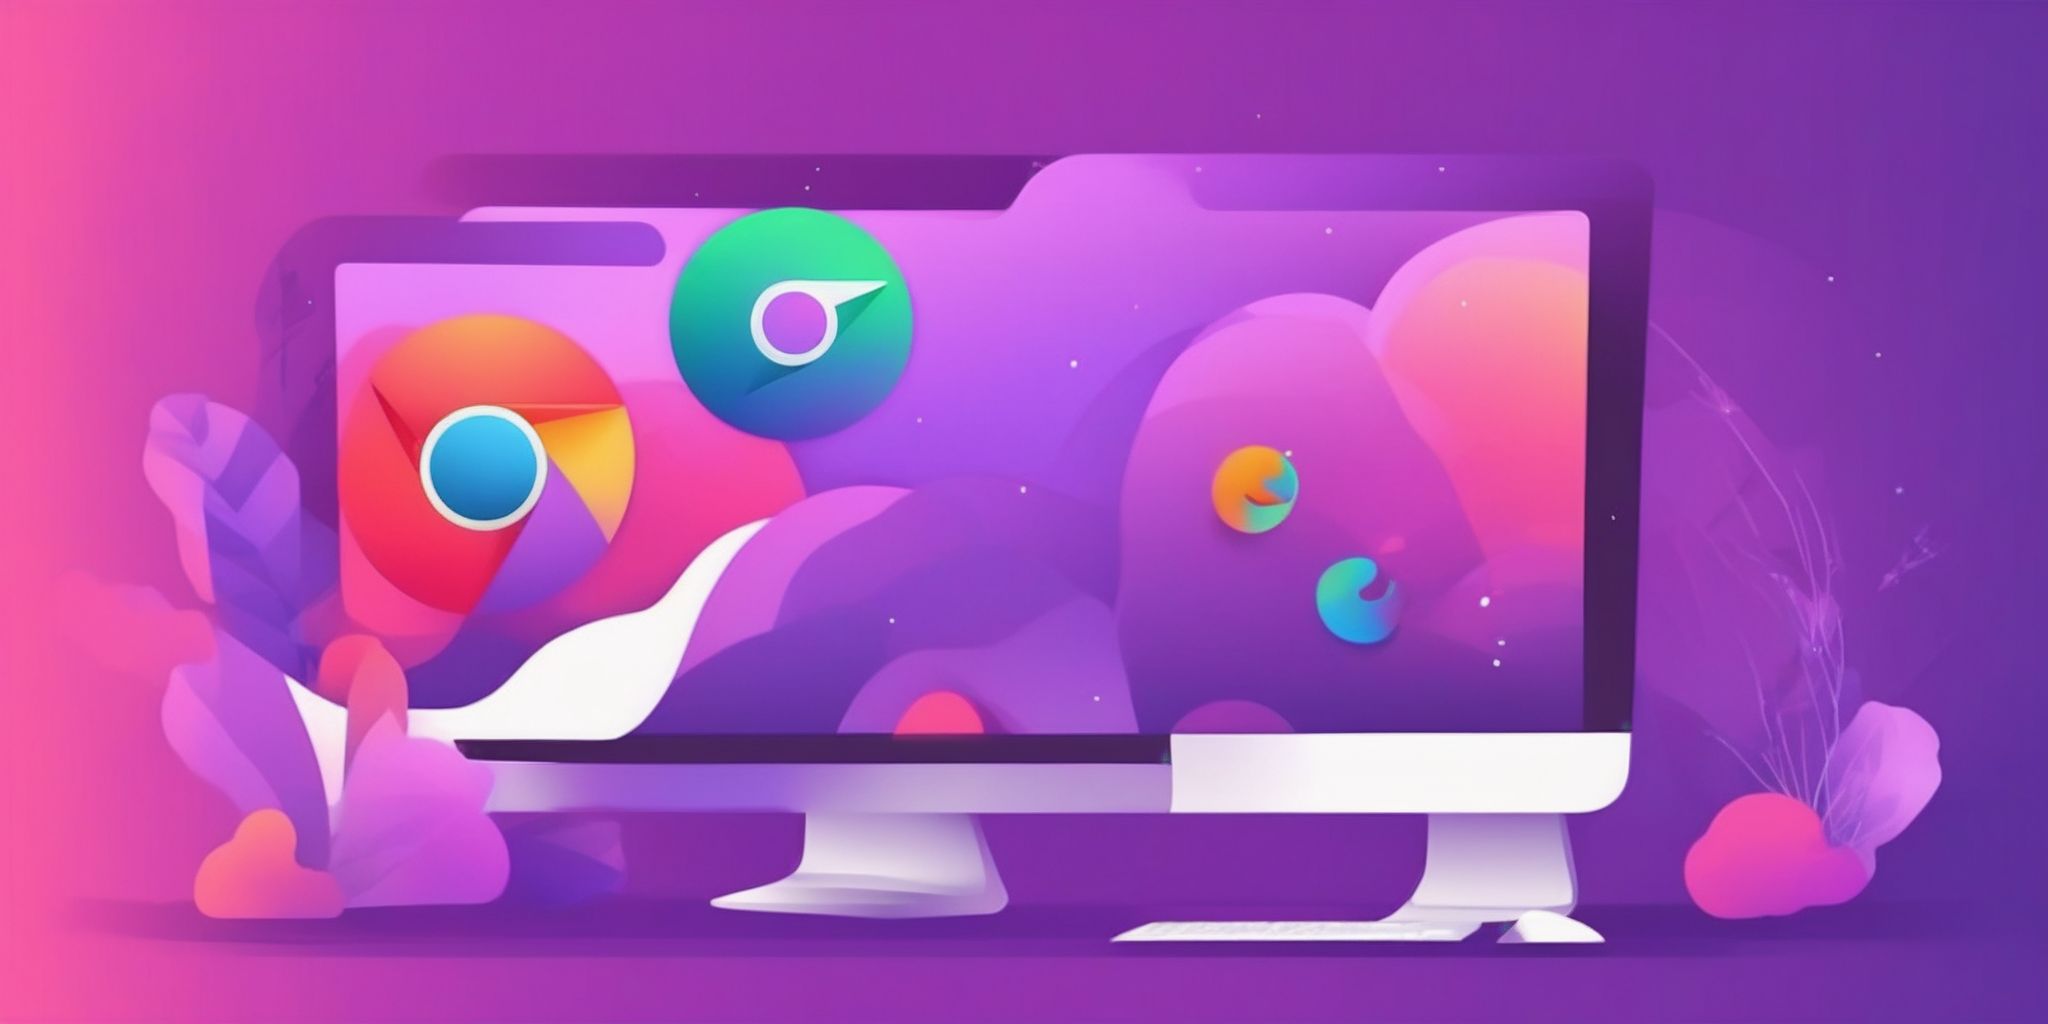 Browser in flat illustration style, colorful purple gradient colors